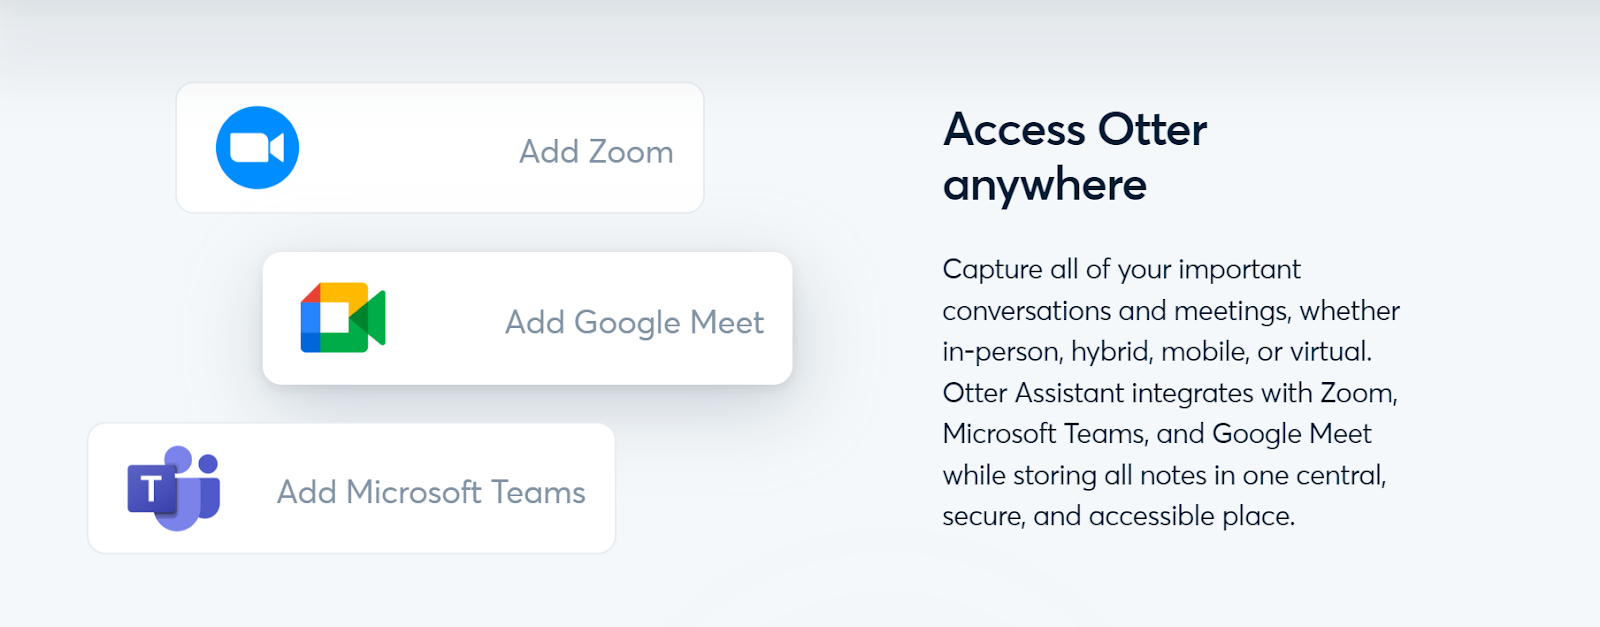 Otter Assistant works with Zoom, Microsoft Teams, and Google Meet to take and distribute notes automatically.